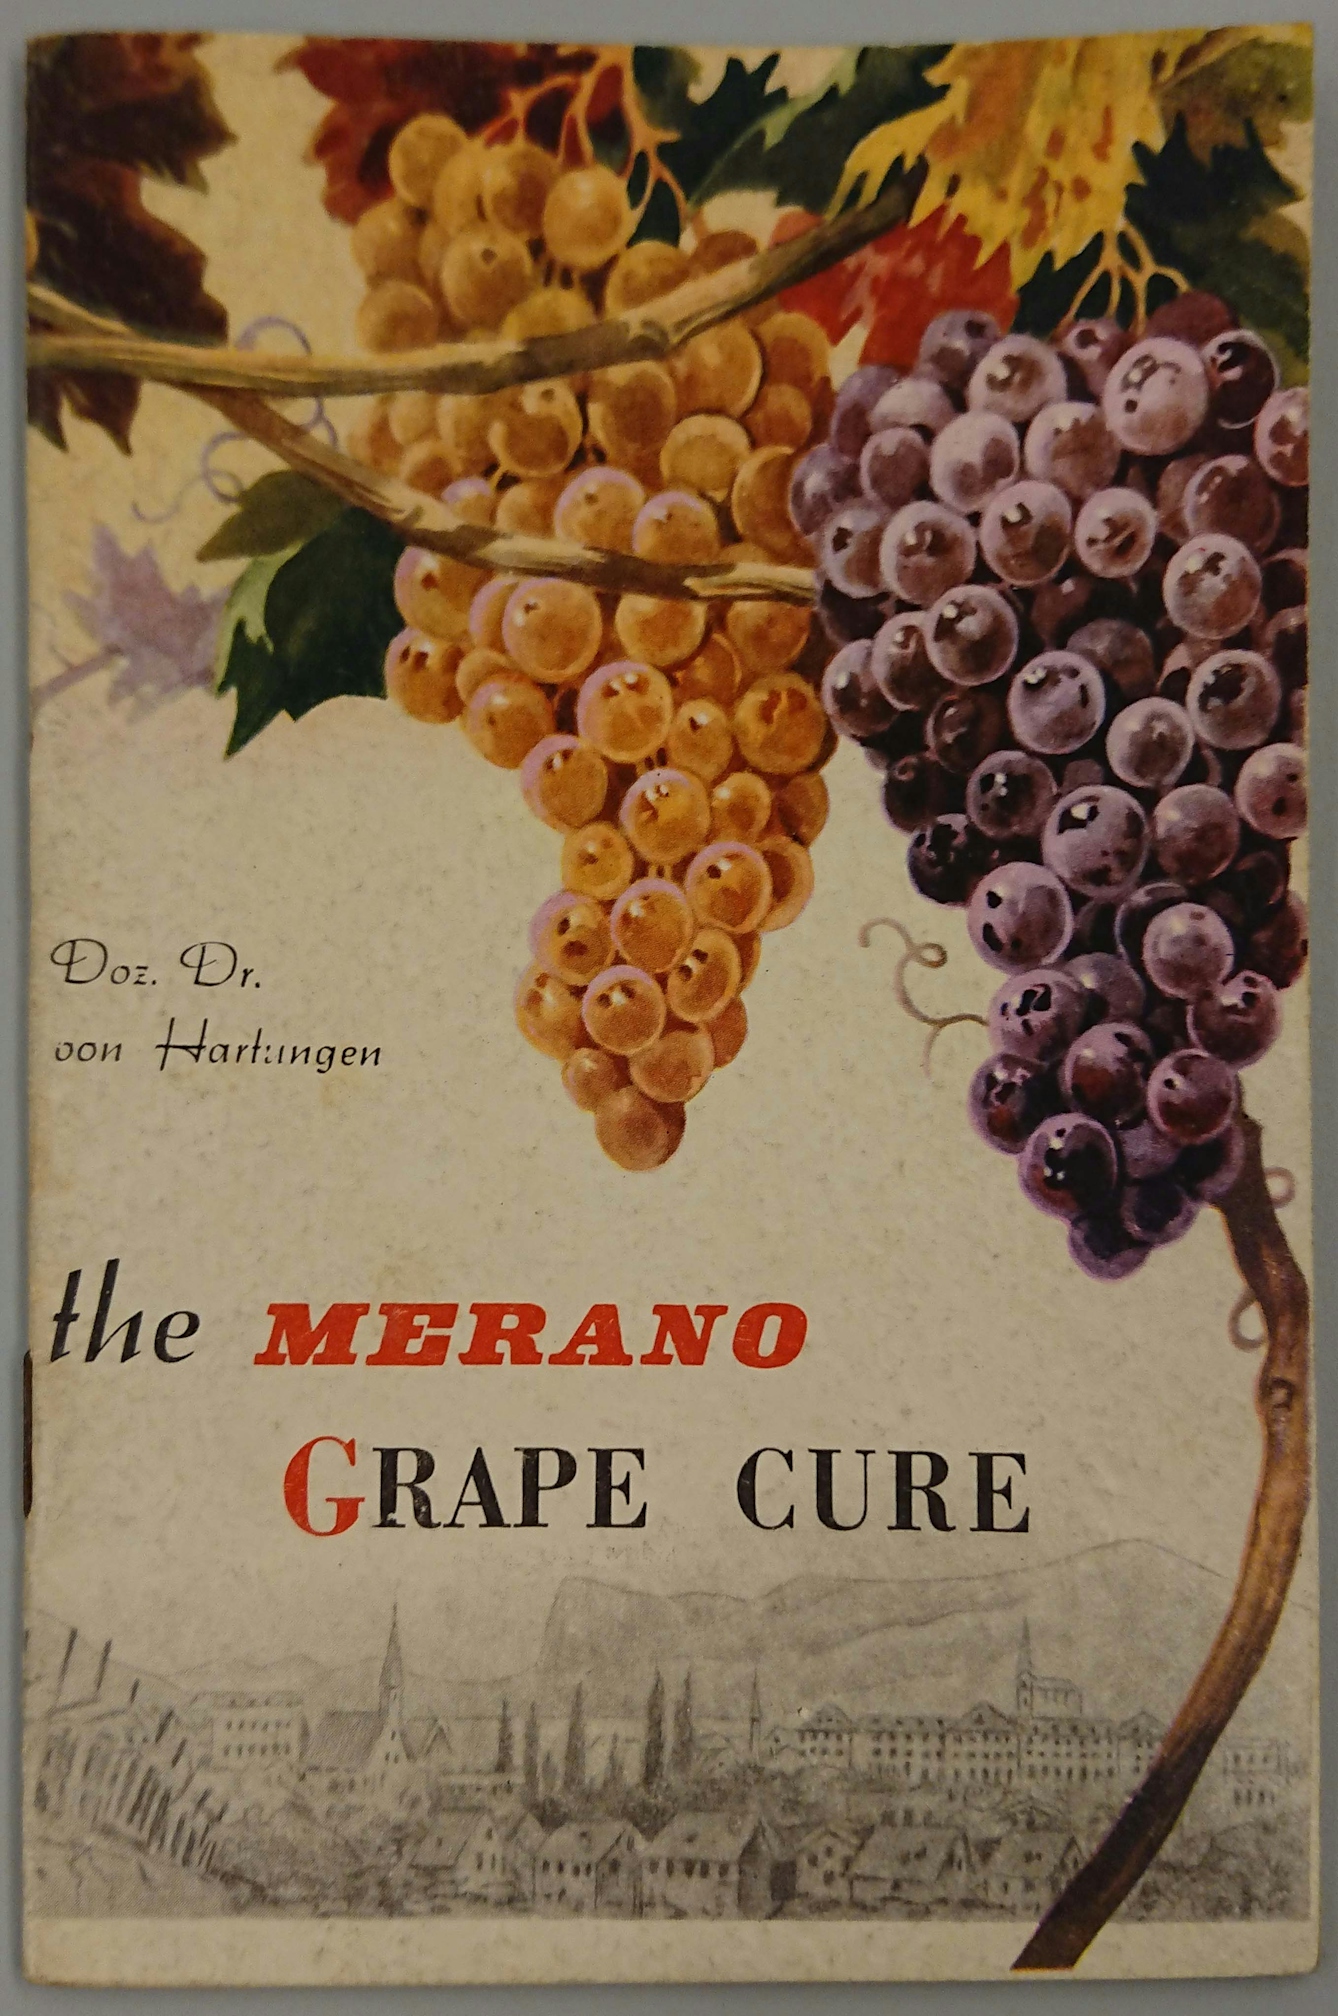 Cover of a book entitled 'The Merano Grape Cure', featuring two bunches of grapes, one dark and one pale.